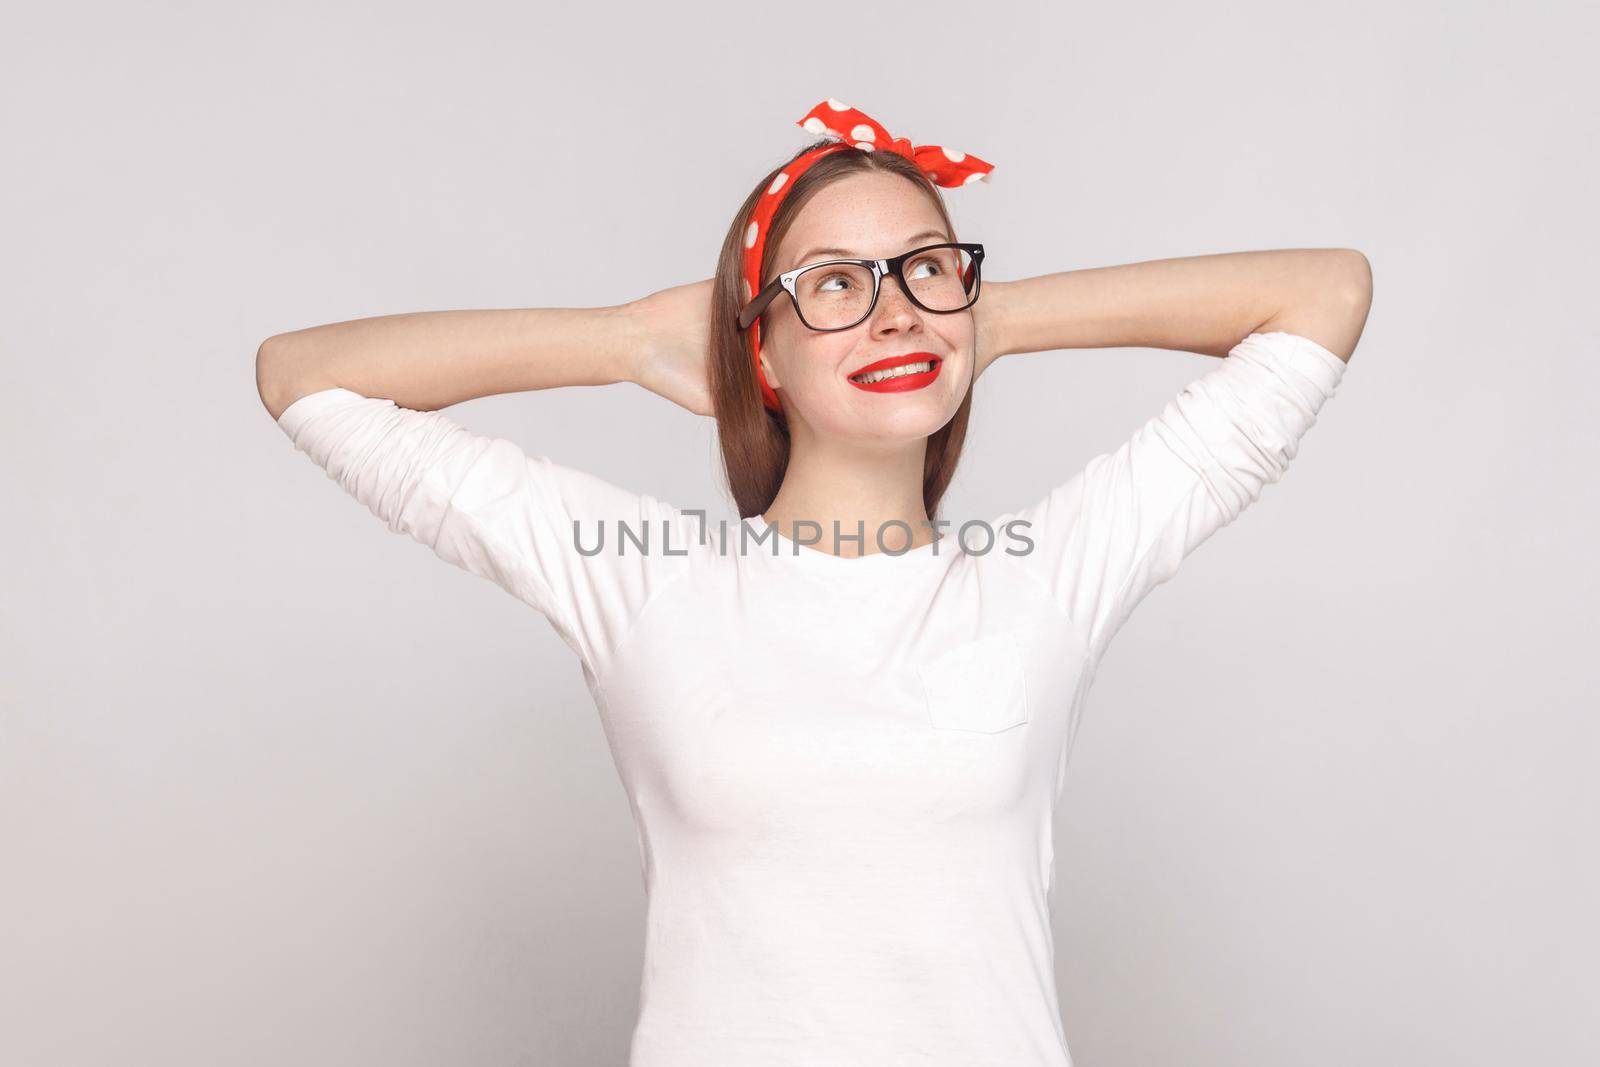 dreaming hopeful portrait of beautiful emotional young woman in white t-shirt with freckles, black glasses, red lips and head band. indoor studio shot, isolated on light gray background.